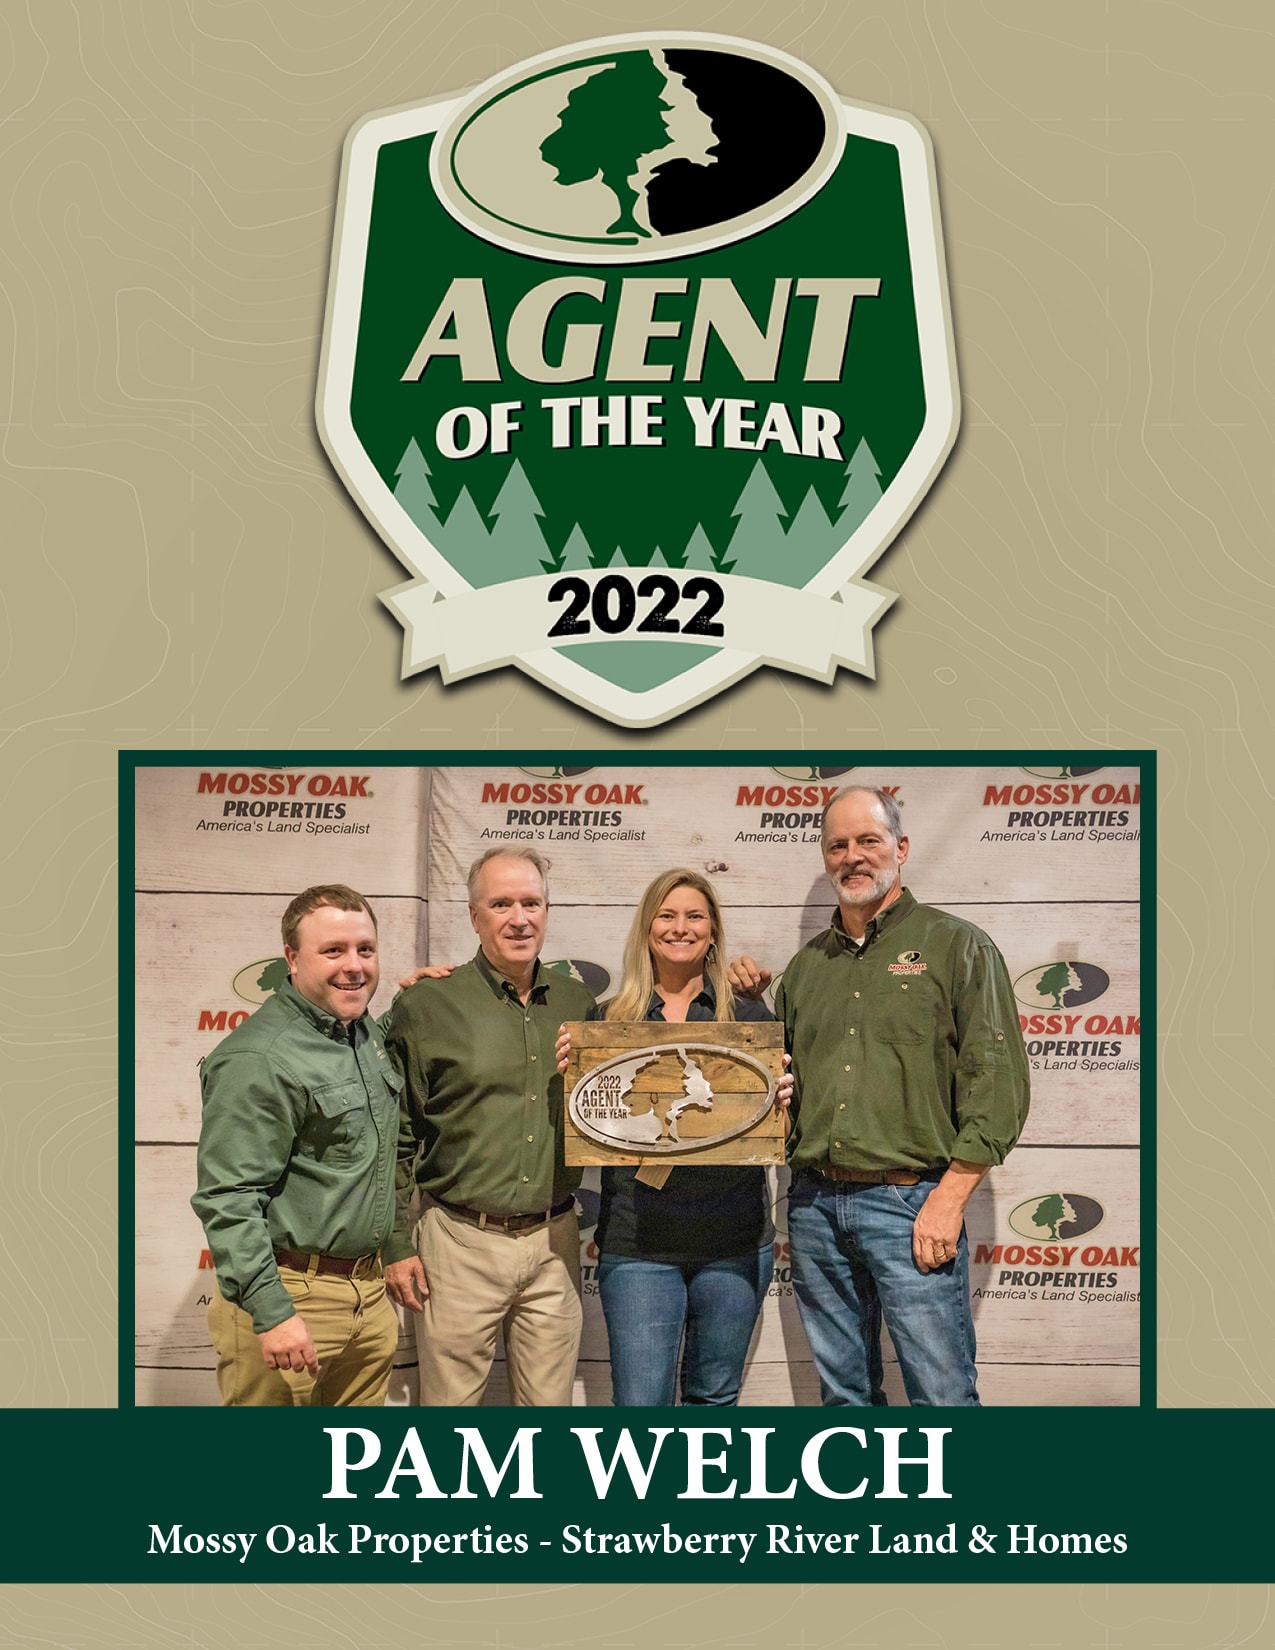 Agent of the Year 2022 - Pam Welch